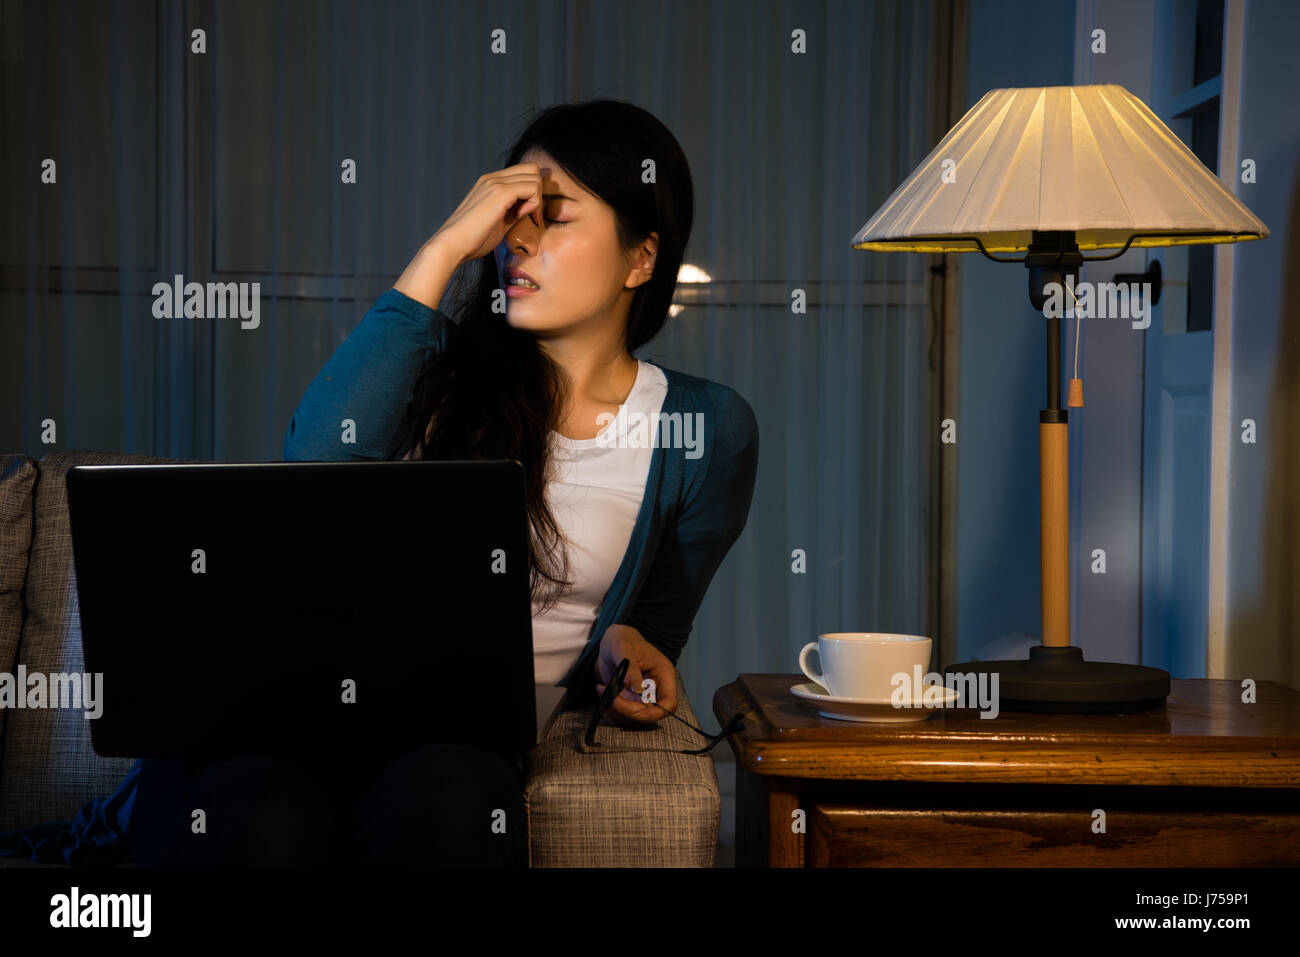 beautiful business girl having high intraocular pressure at night while working in free clothing at comfortable office massaging eyes relieving stress Stock Photo